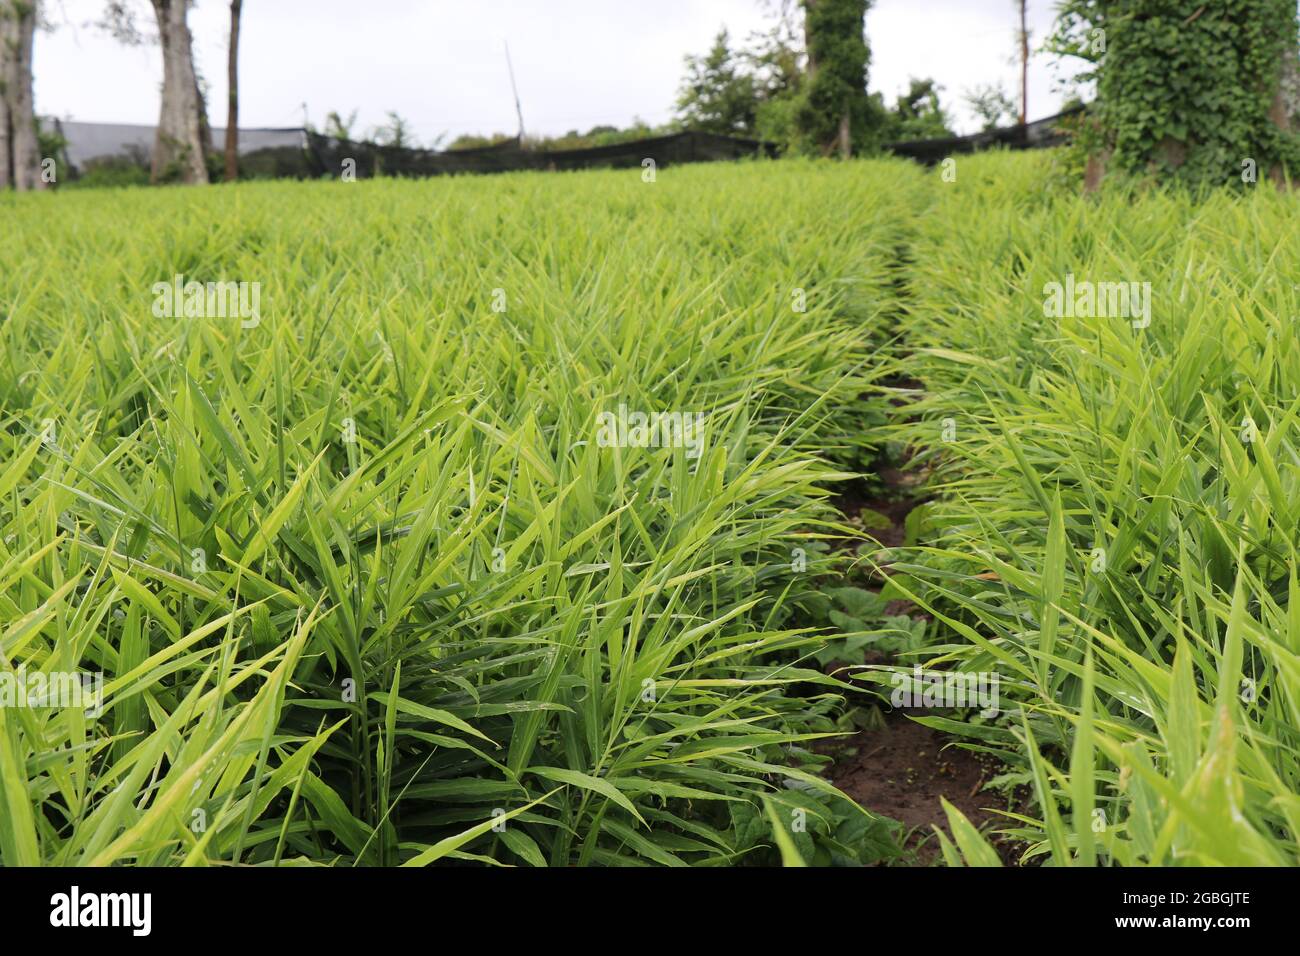 Landscape of ginger cultivation or Zingiber officinale plantation with fresh growing blades of grass. Growing ginger root for medicine and spice Stock Photo